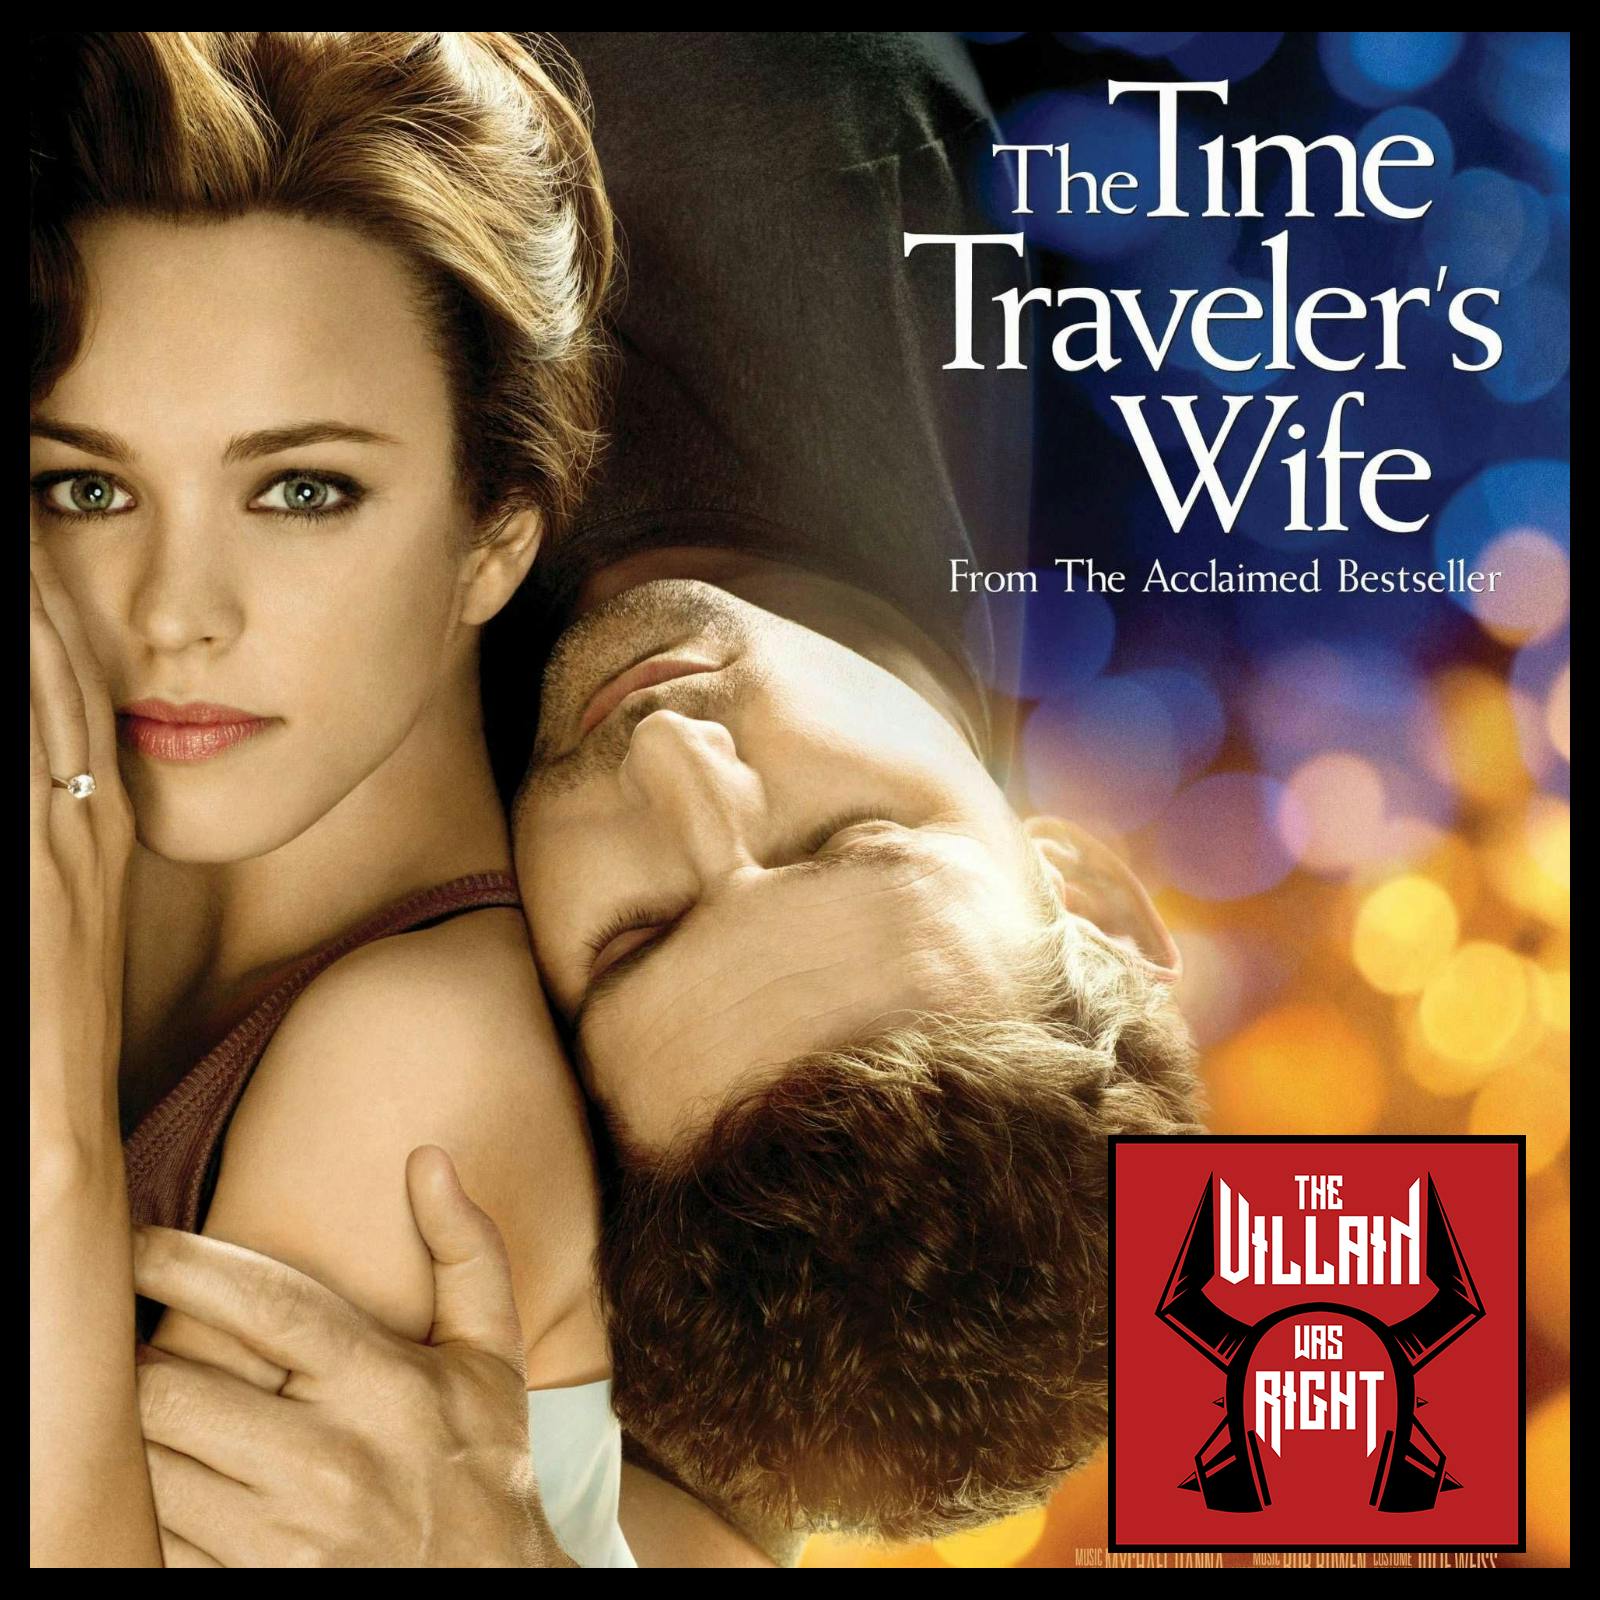 283: The Time Traveler’s Wife